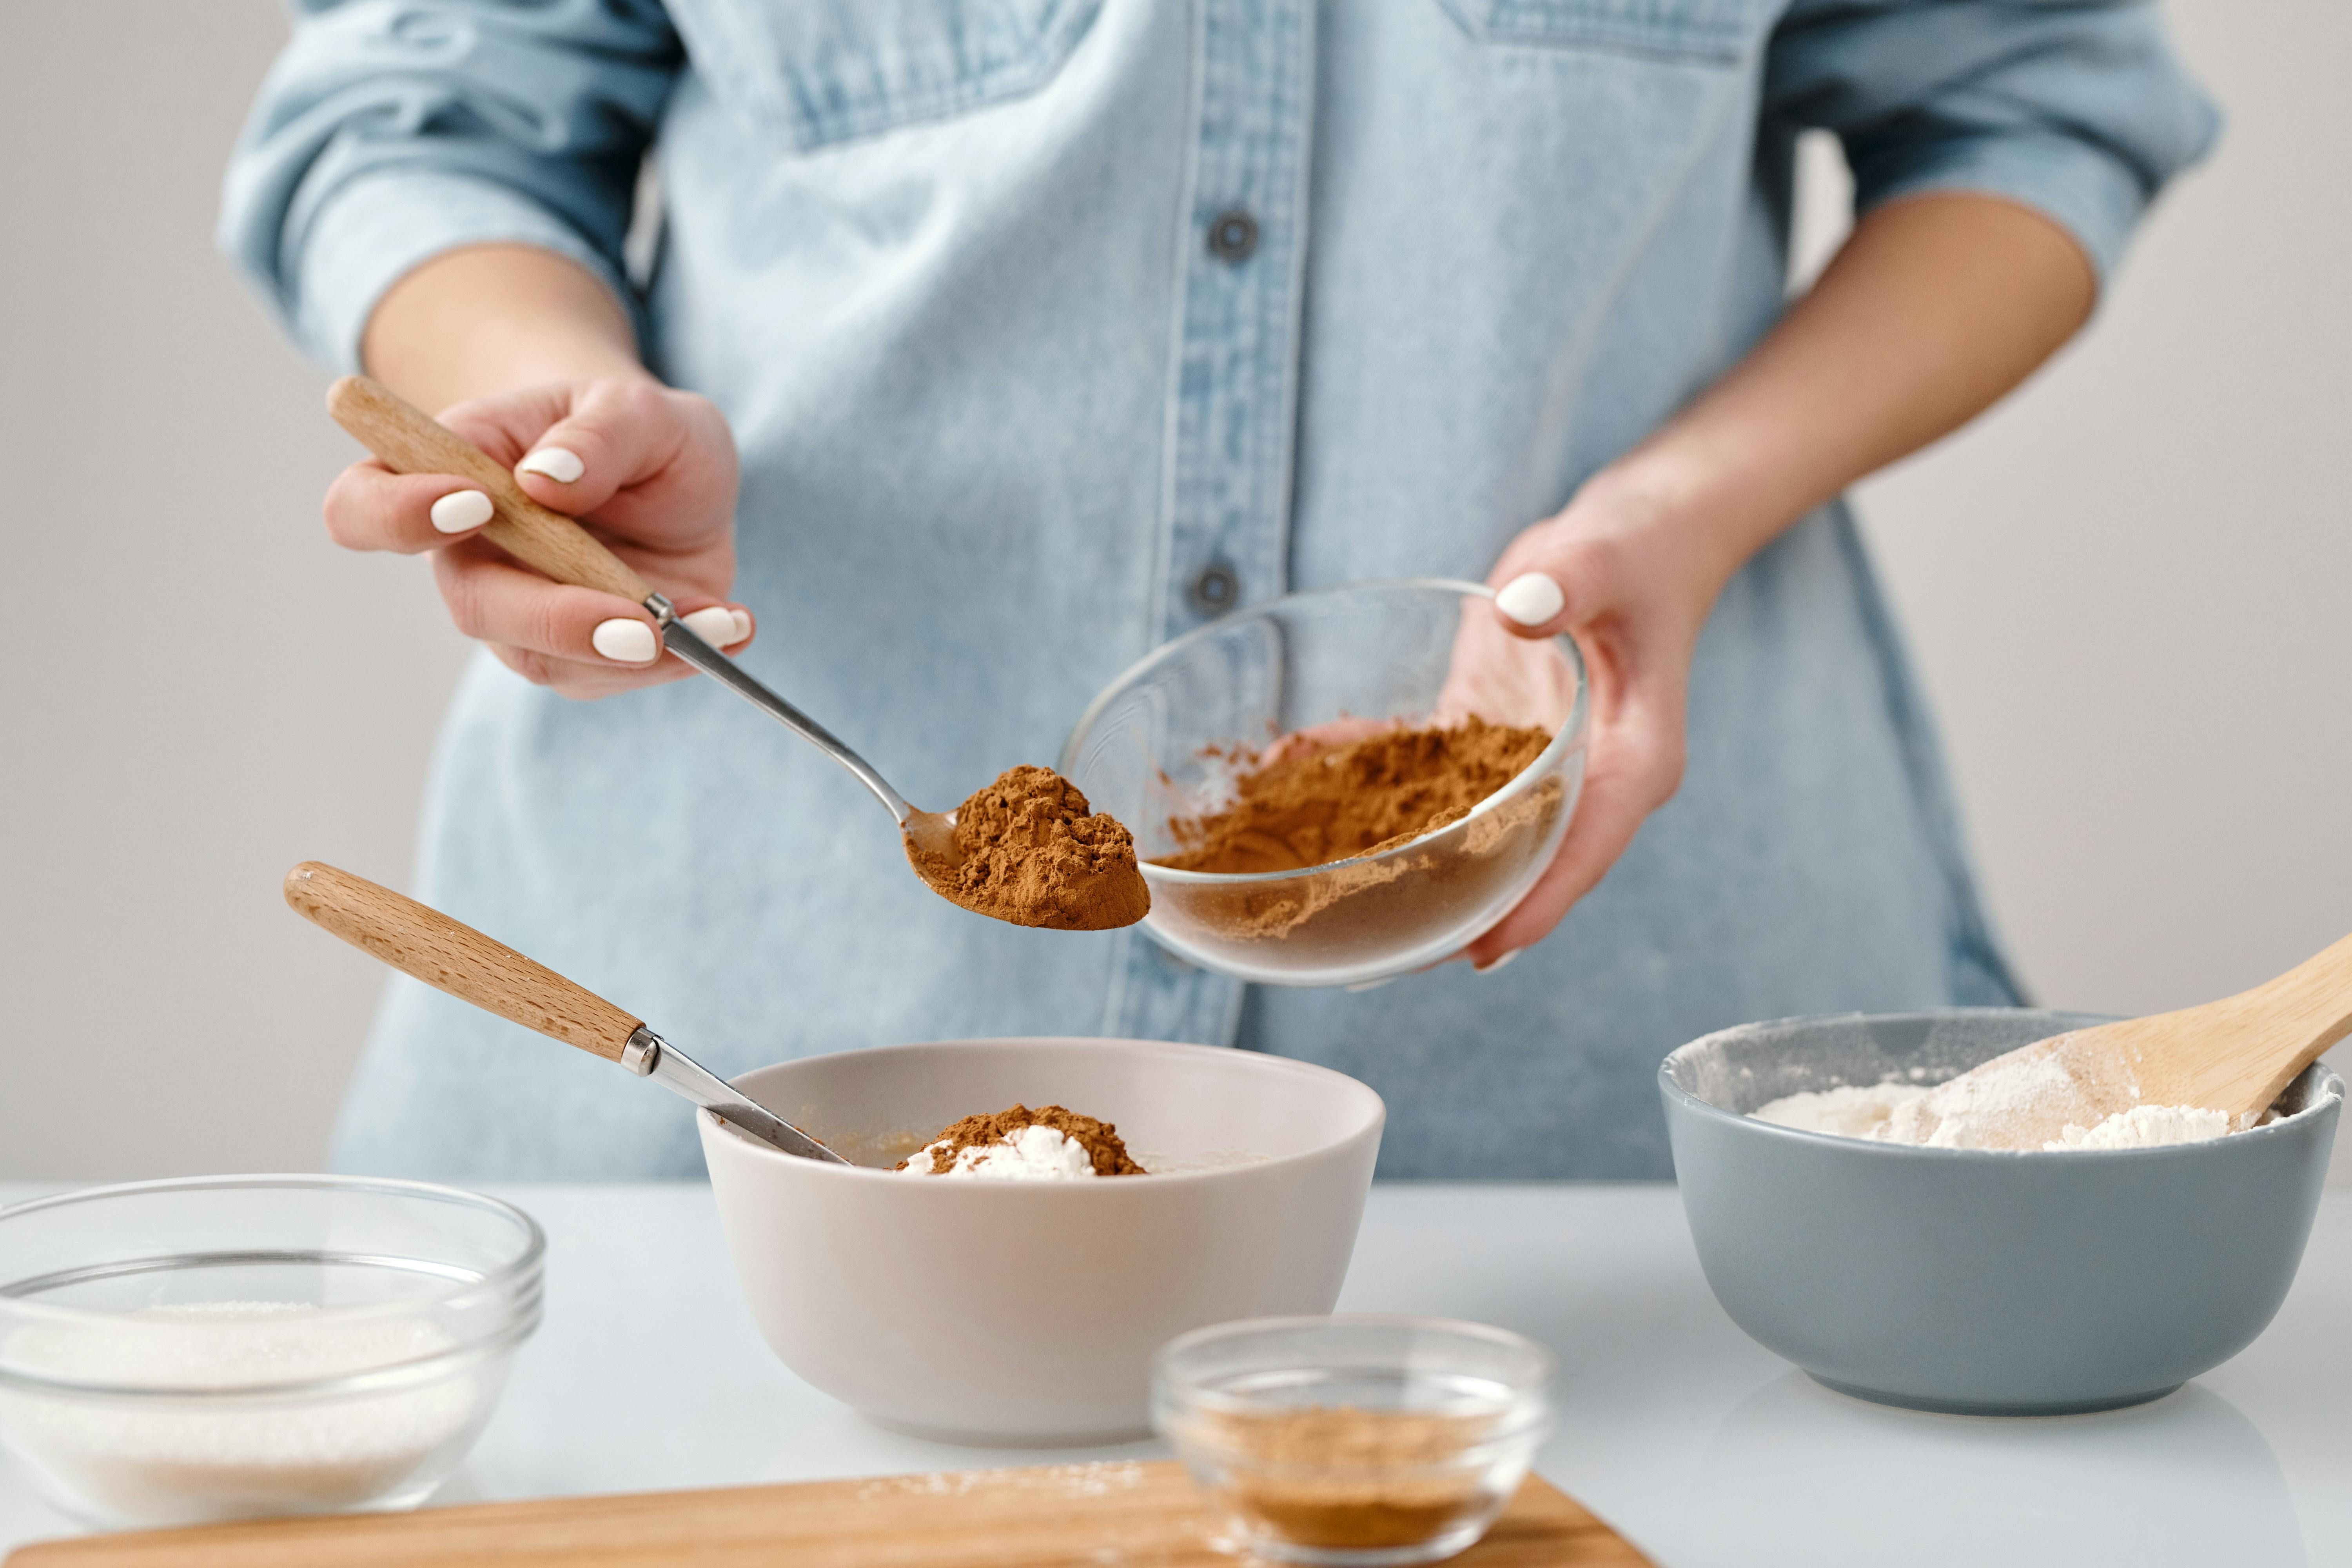 Woman sprinkling cinnamon into a dish while cooking, enhancing flavor naturally.